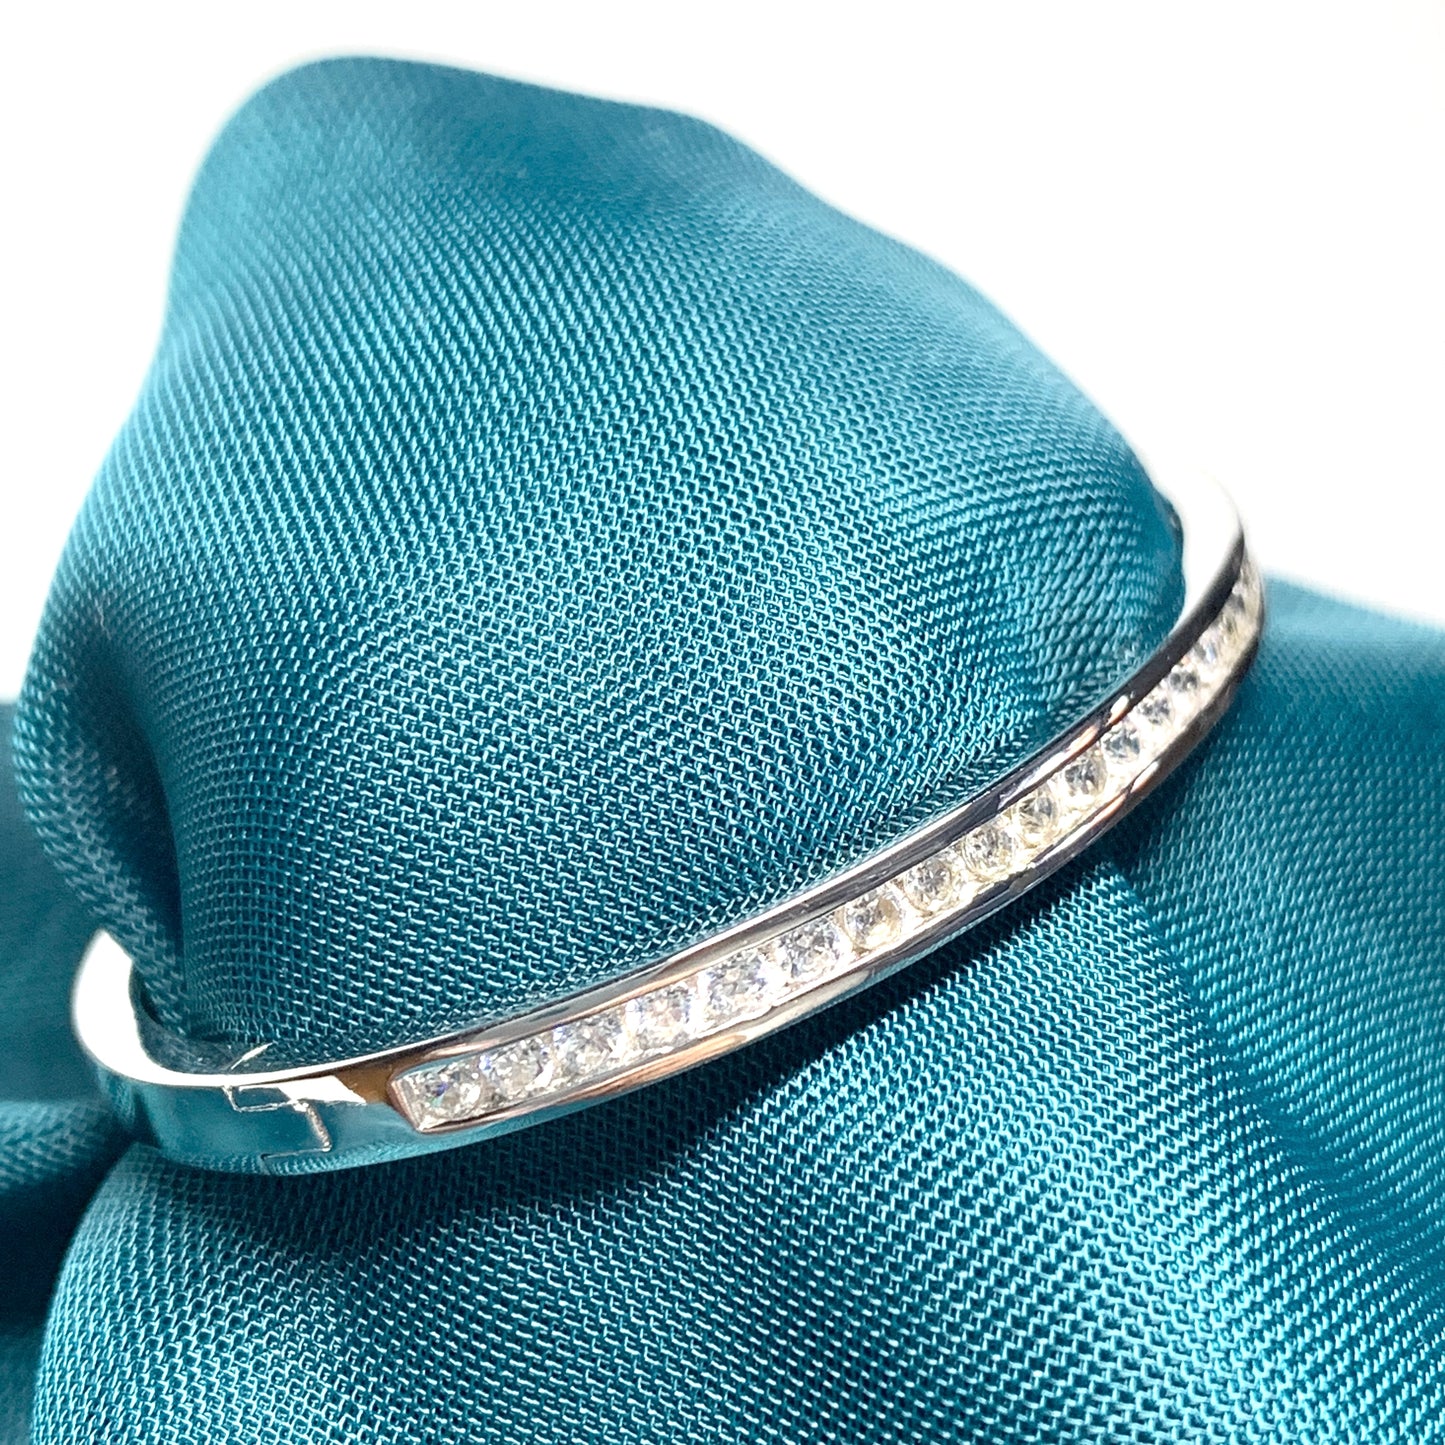 Oval Bangle with Round Cubic Zirconia Stones